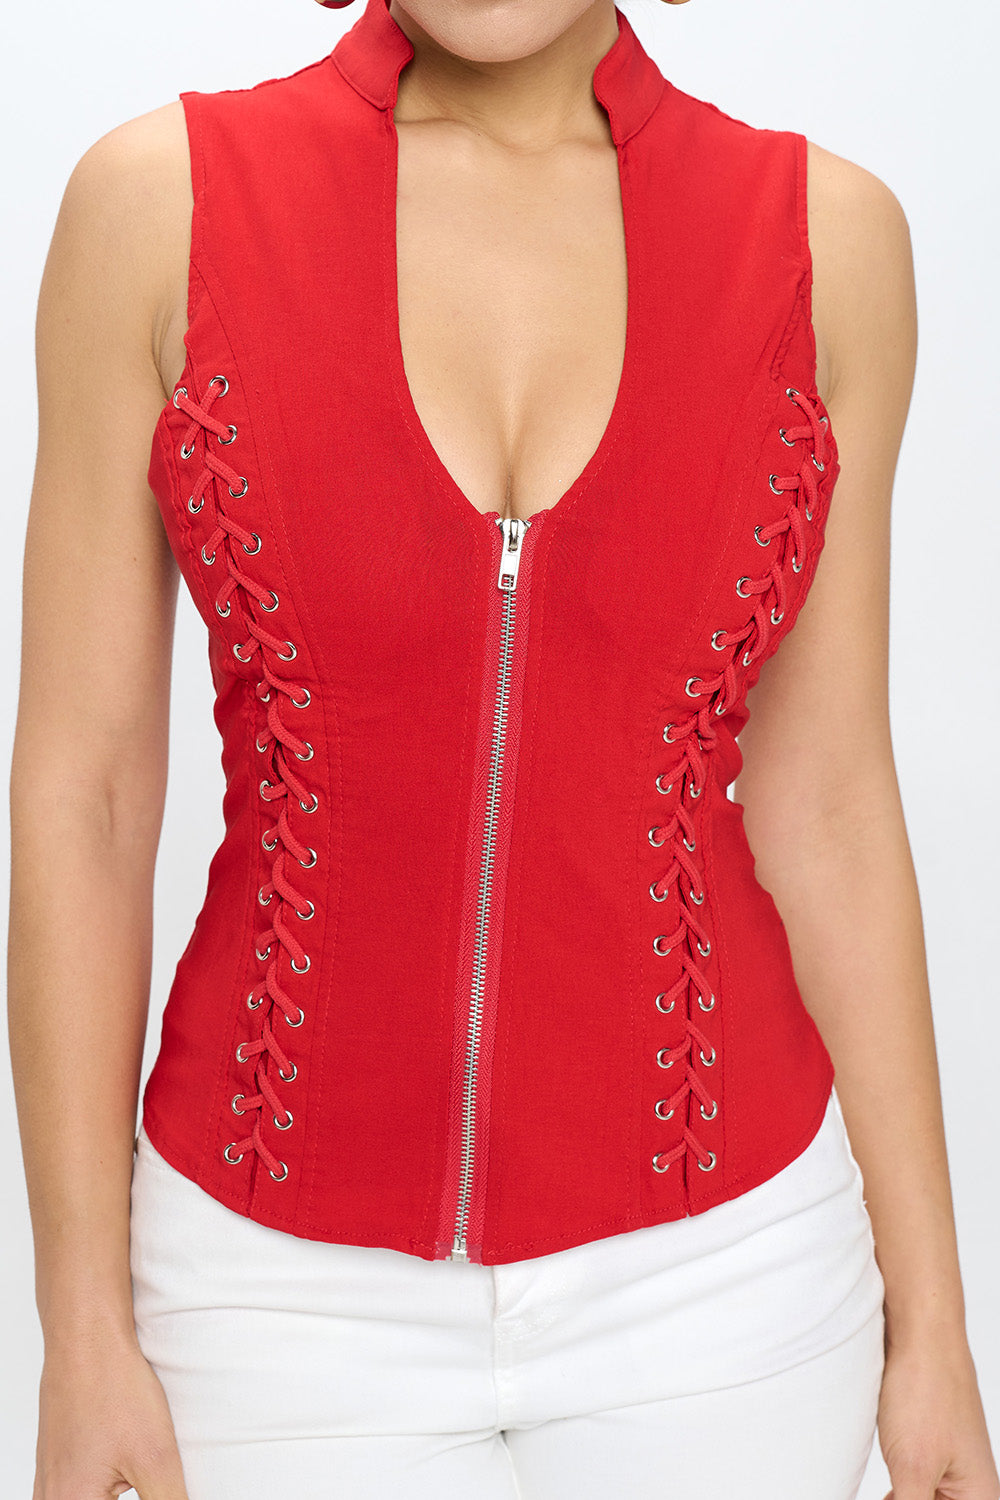 FRONT LACE UP BACK CUT OUT DETAIL TOP